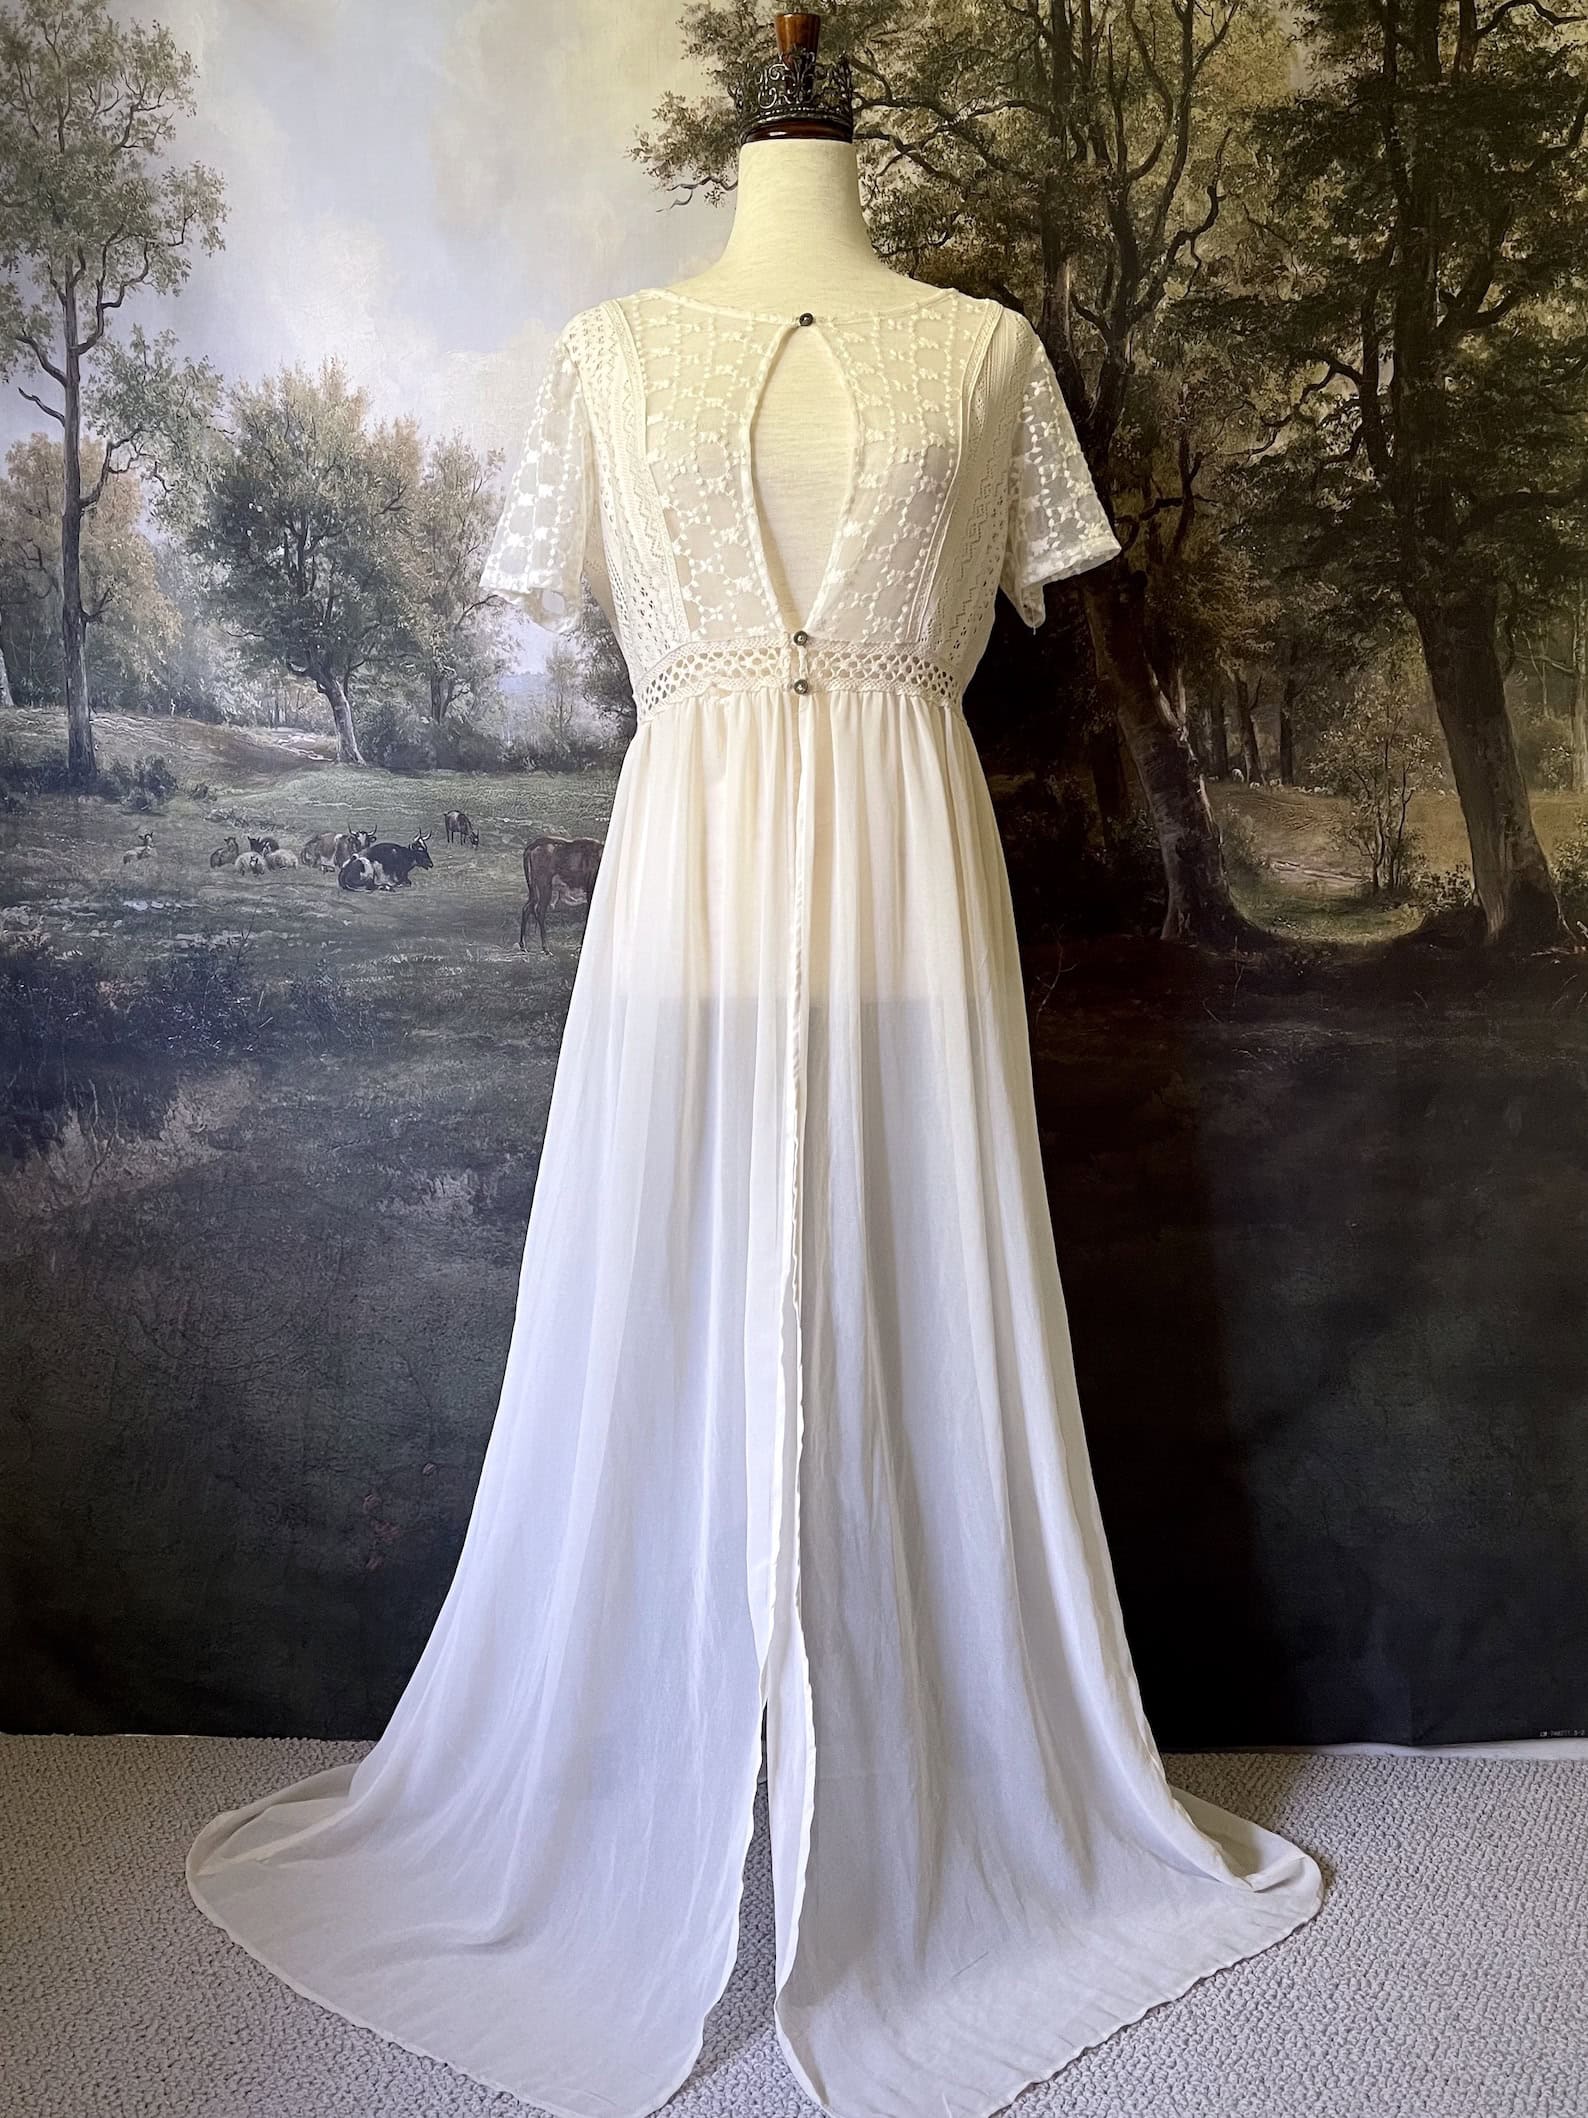 A historically inspired Edwardian era Ivory maxi Overdress with Floral Lace Details is pictured on a mannequin in front of an art history backdrop.